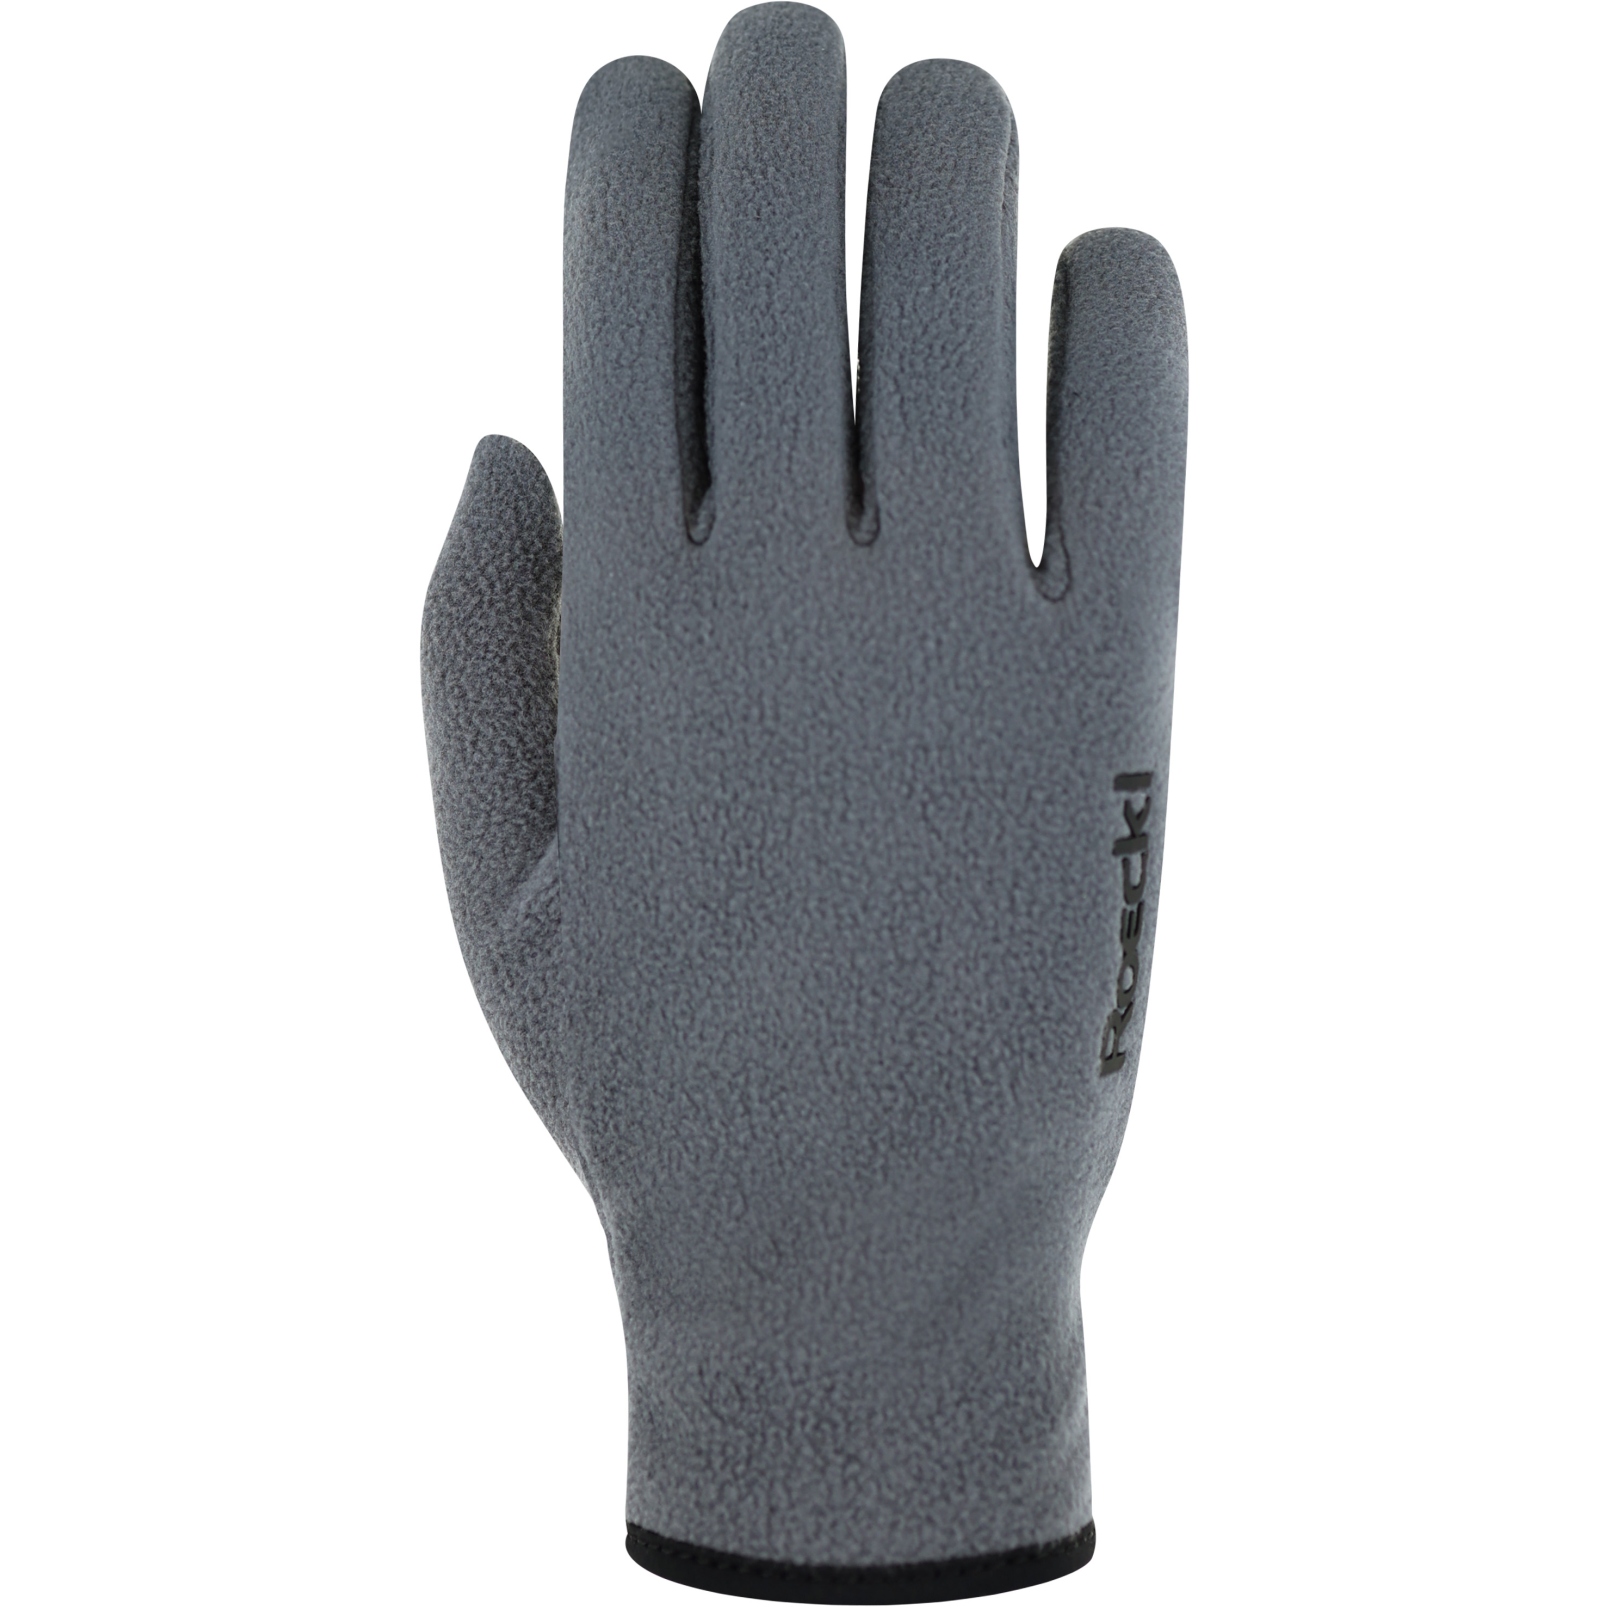 Picture of Roeckl Sports Kampen 2 Winter Gloves - grey pinstripe 8560